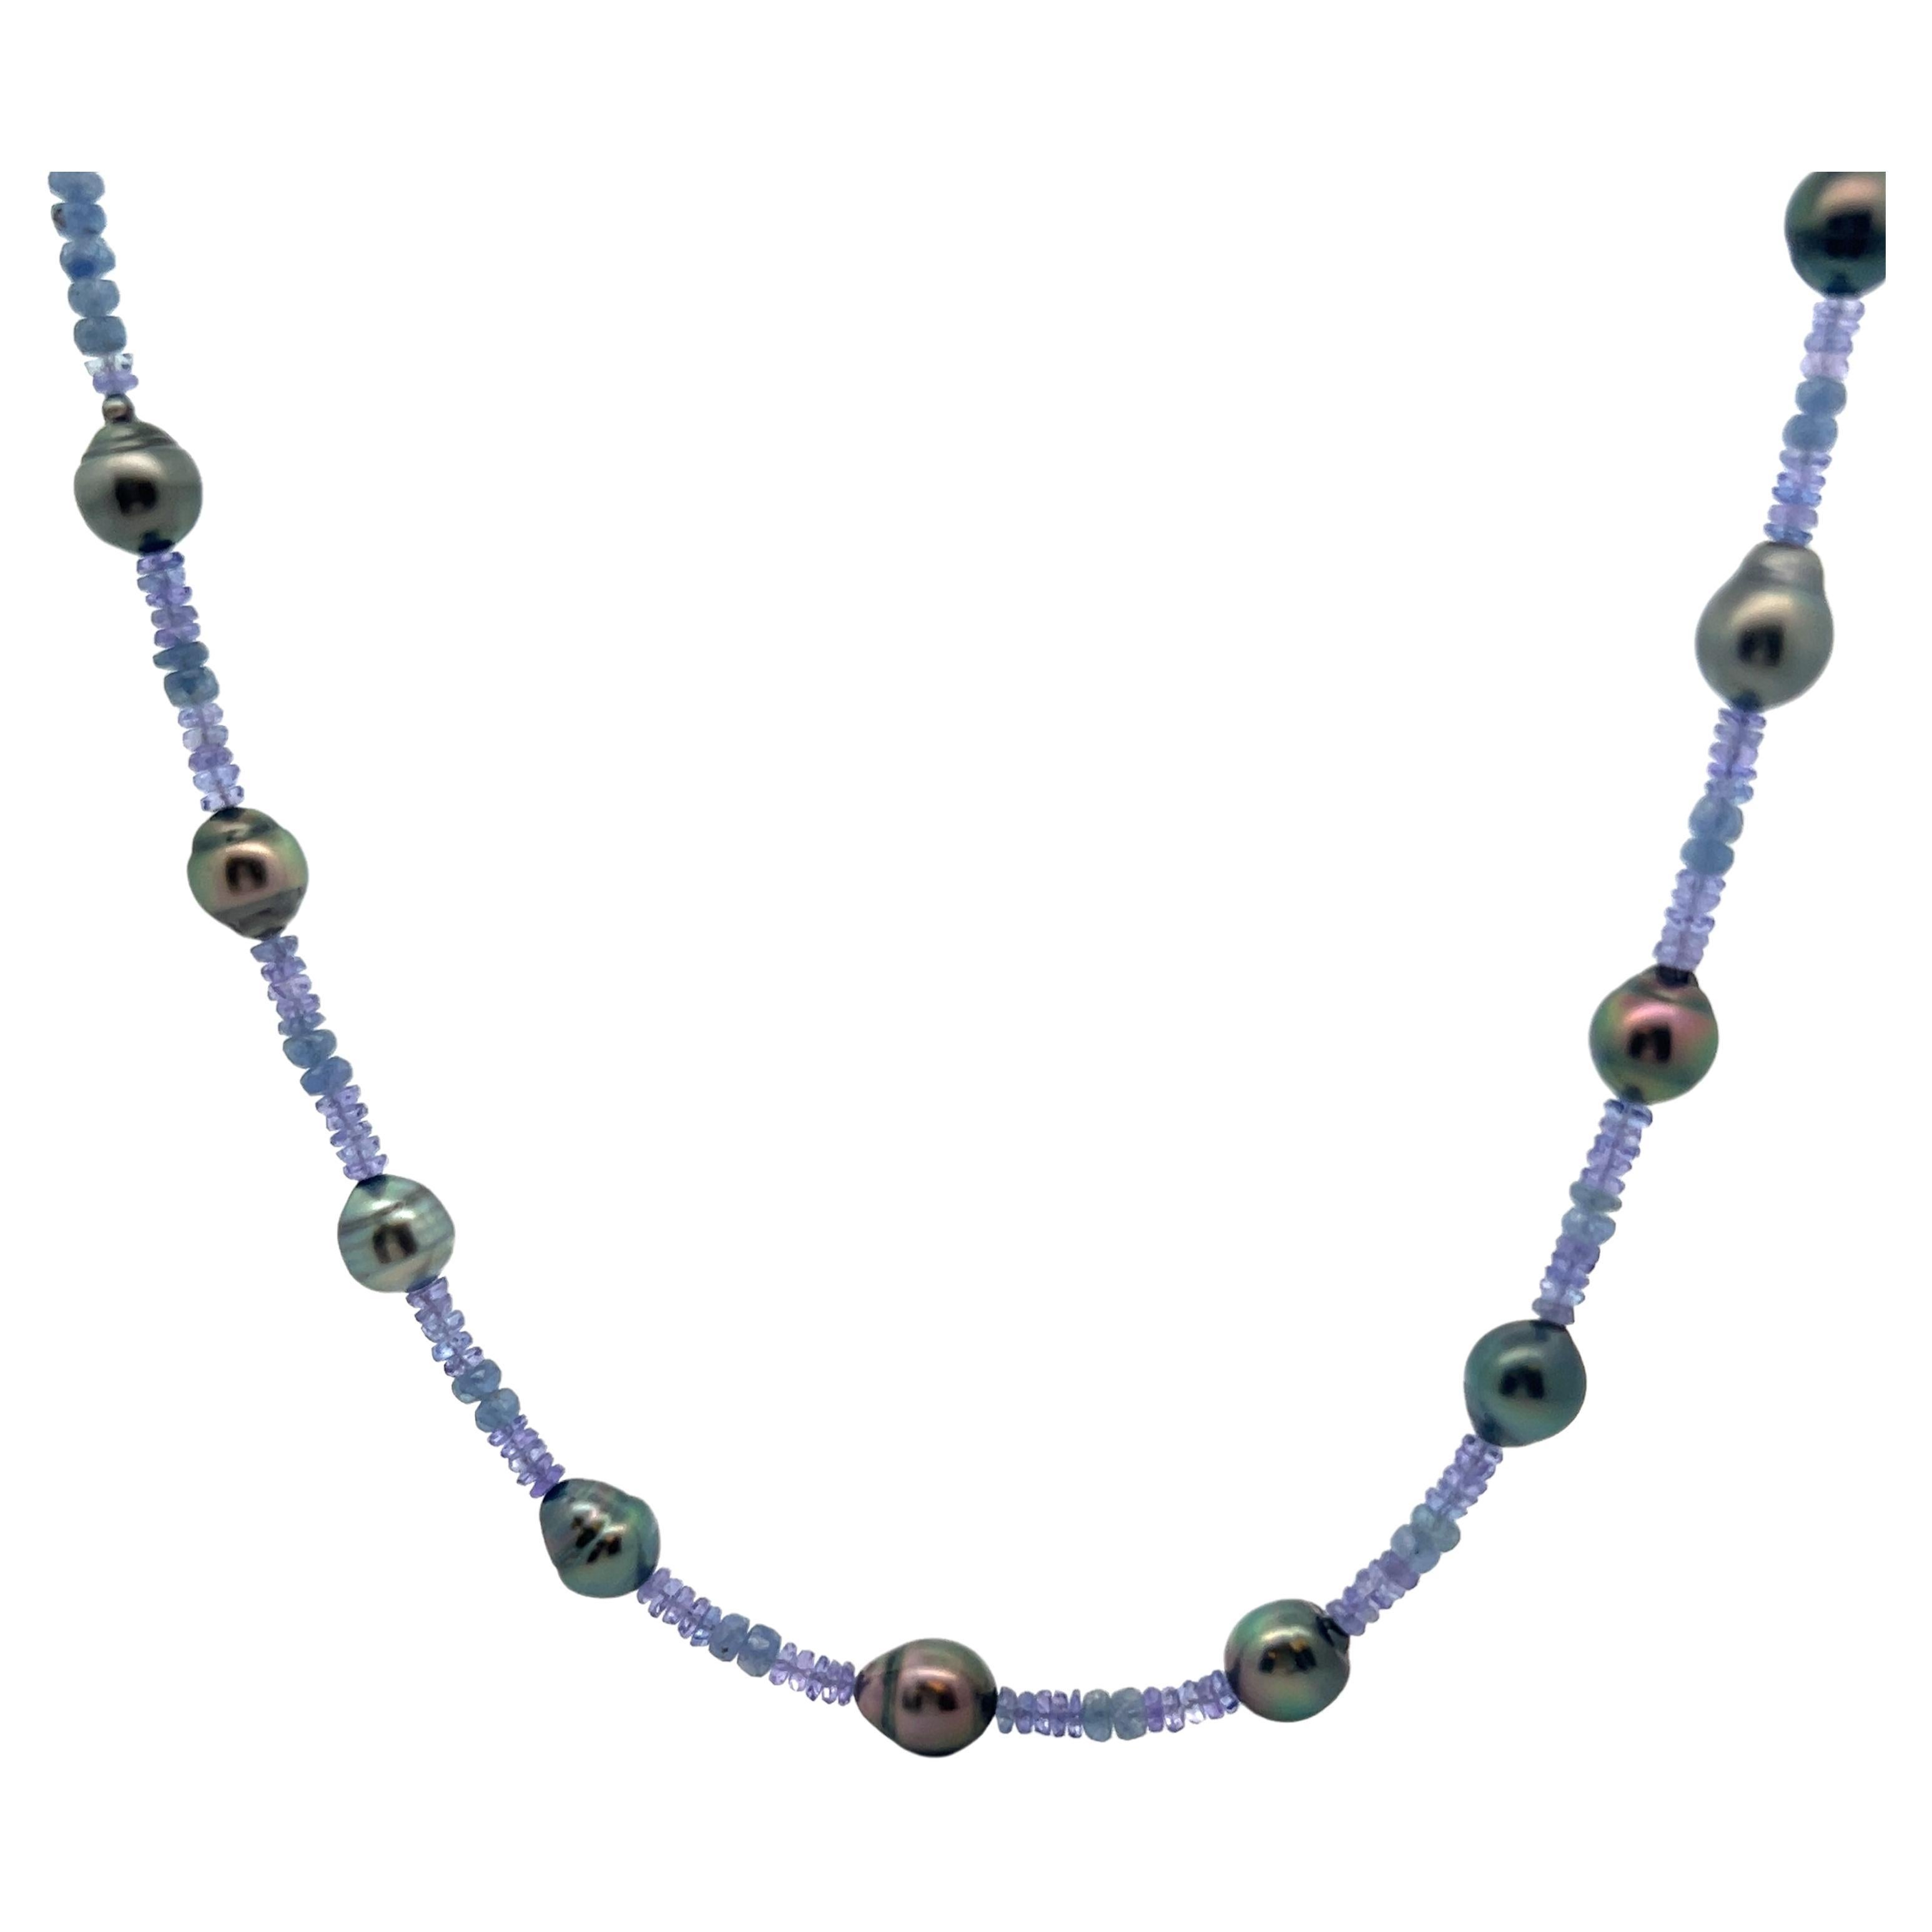 Tanzanite Sapphire Beads Tahitian Baroque Black Pearls Sterling Silver Necklace